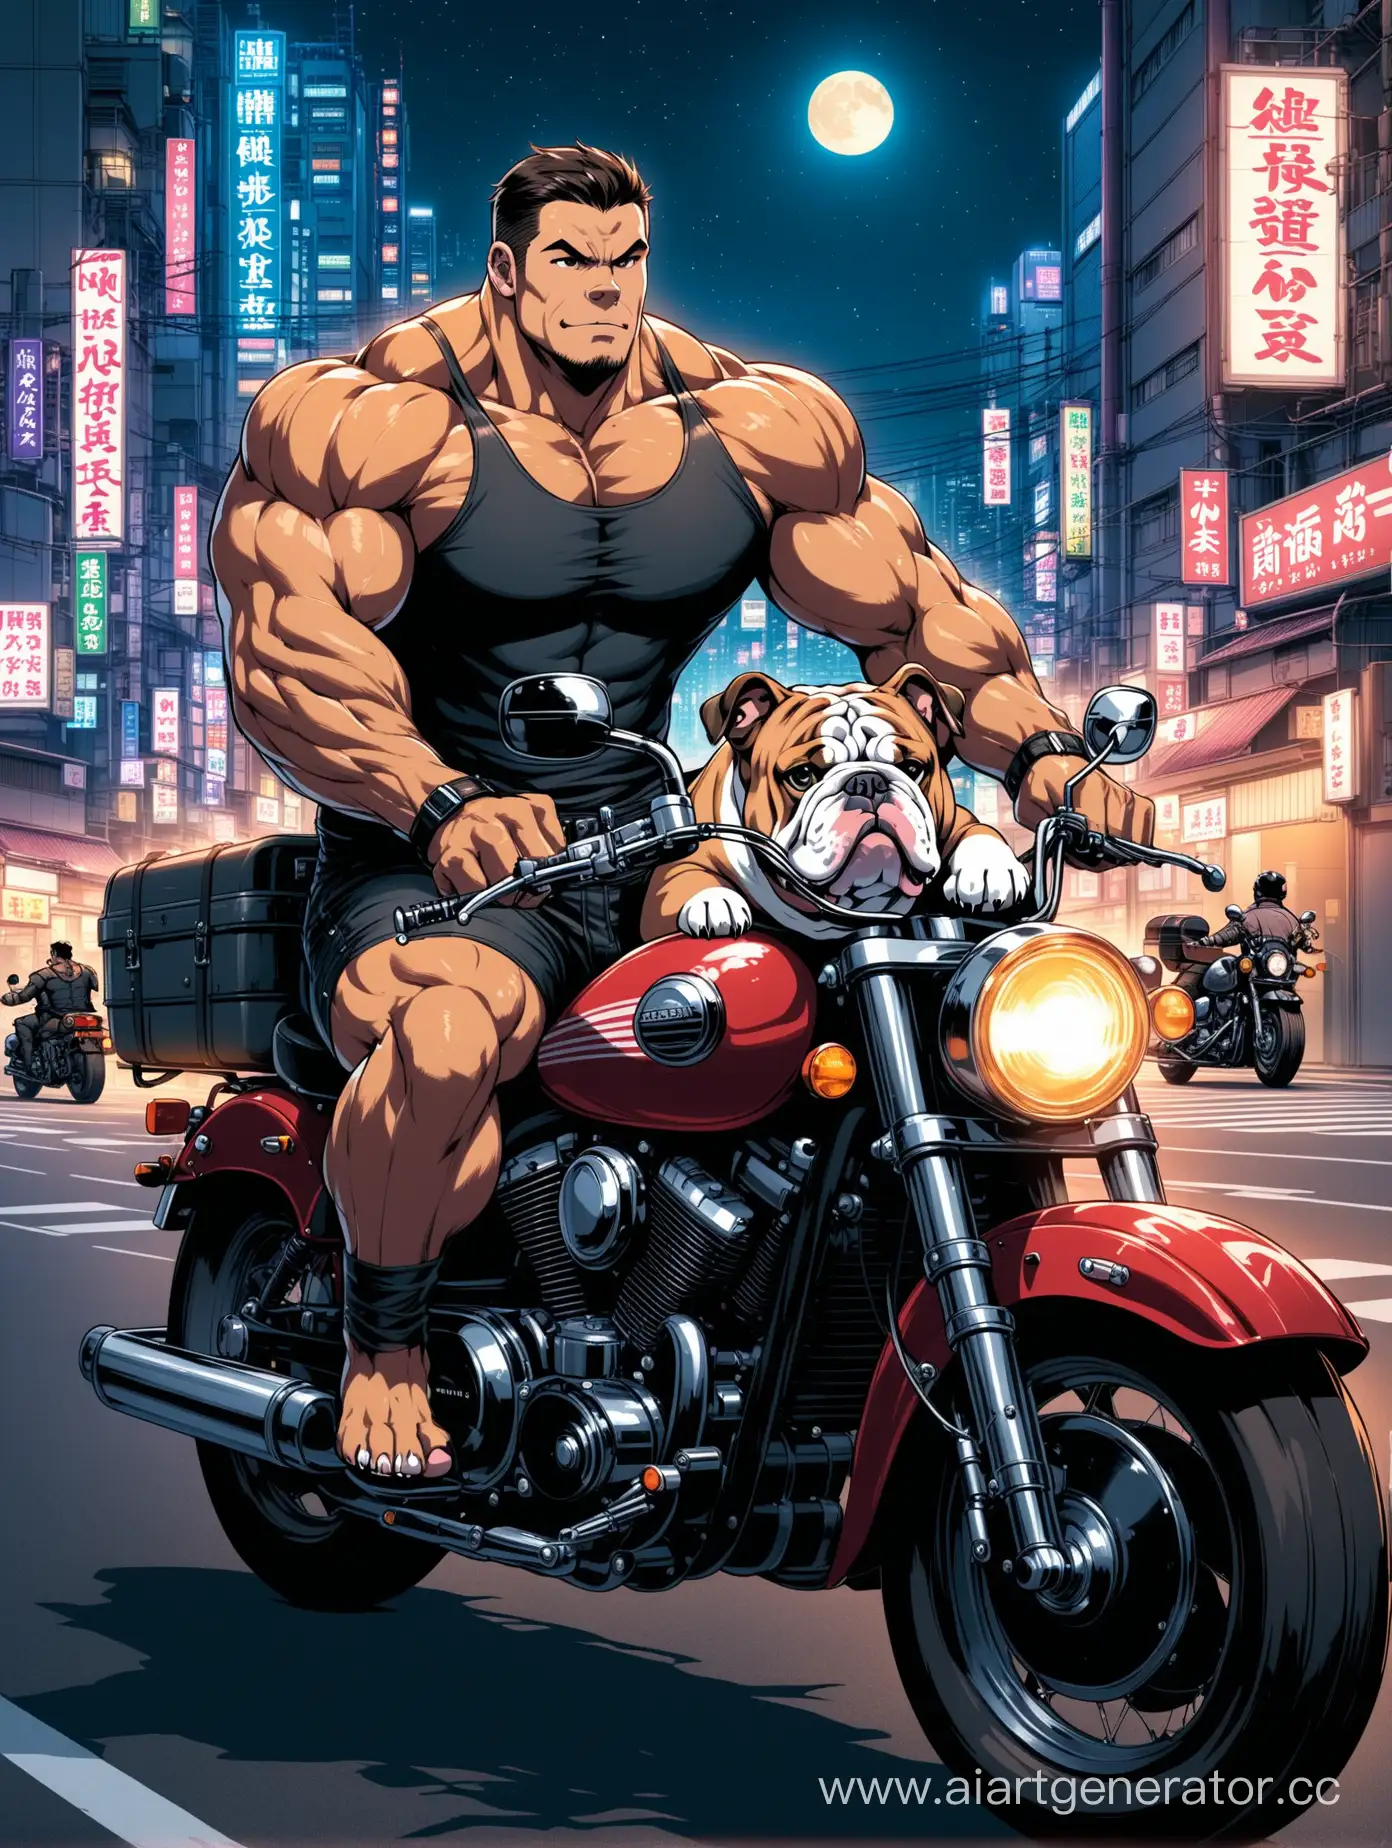 Muscular-Man-Riding-Motorcycle-with-Bulldog-Trailer-in-Tokyo-Night-Cityscape